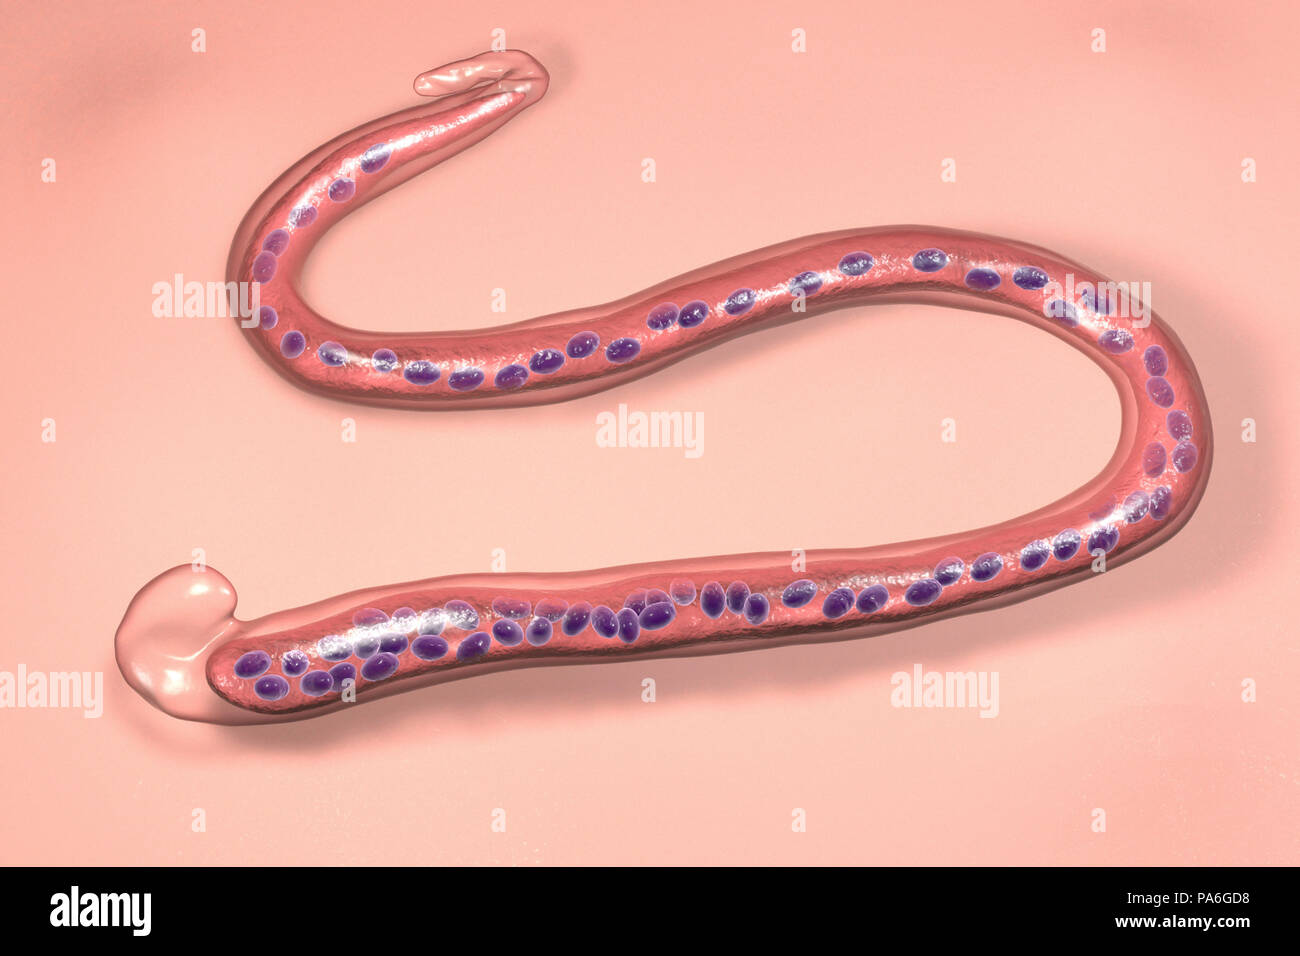 Wuchereria bancrofti. Computer illustration of the microfilaria larval stage of the parasitic worm Wuchereria bancrofti, which causes filariasis in humans. W. bancrofti larvae are also found in several mosquito hosts. They enter the human body as the mosquitoes feed, and migrate to the lymphatic system, where they mature. Illustration shows diagnostic morphological features of W. bancrofti, it is sheathed, without nuclei in the tip of the tail. Stock Photo